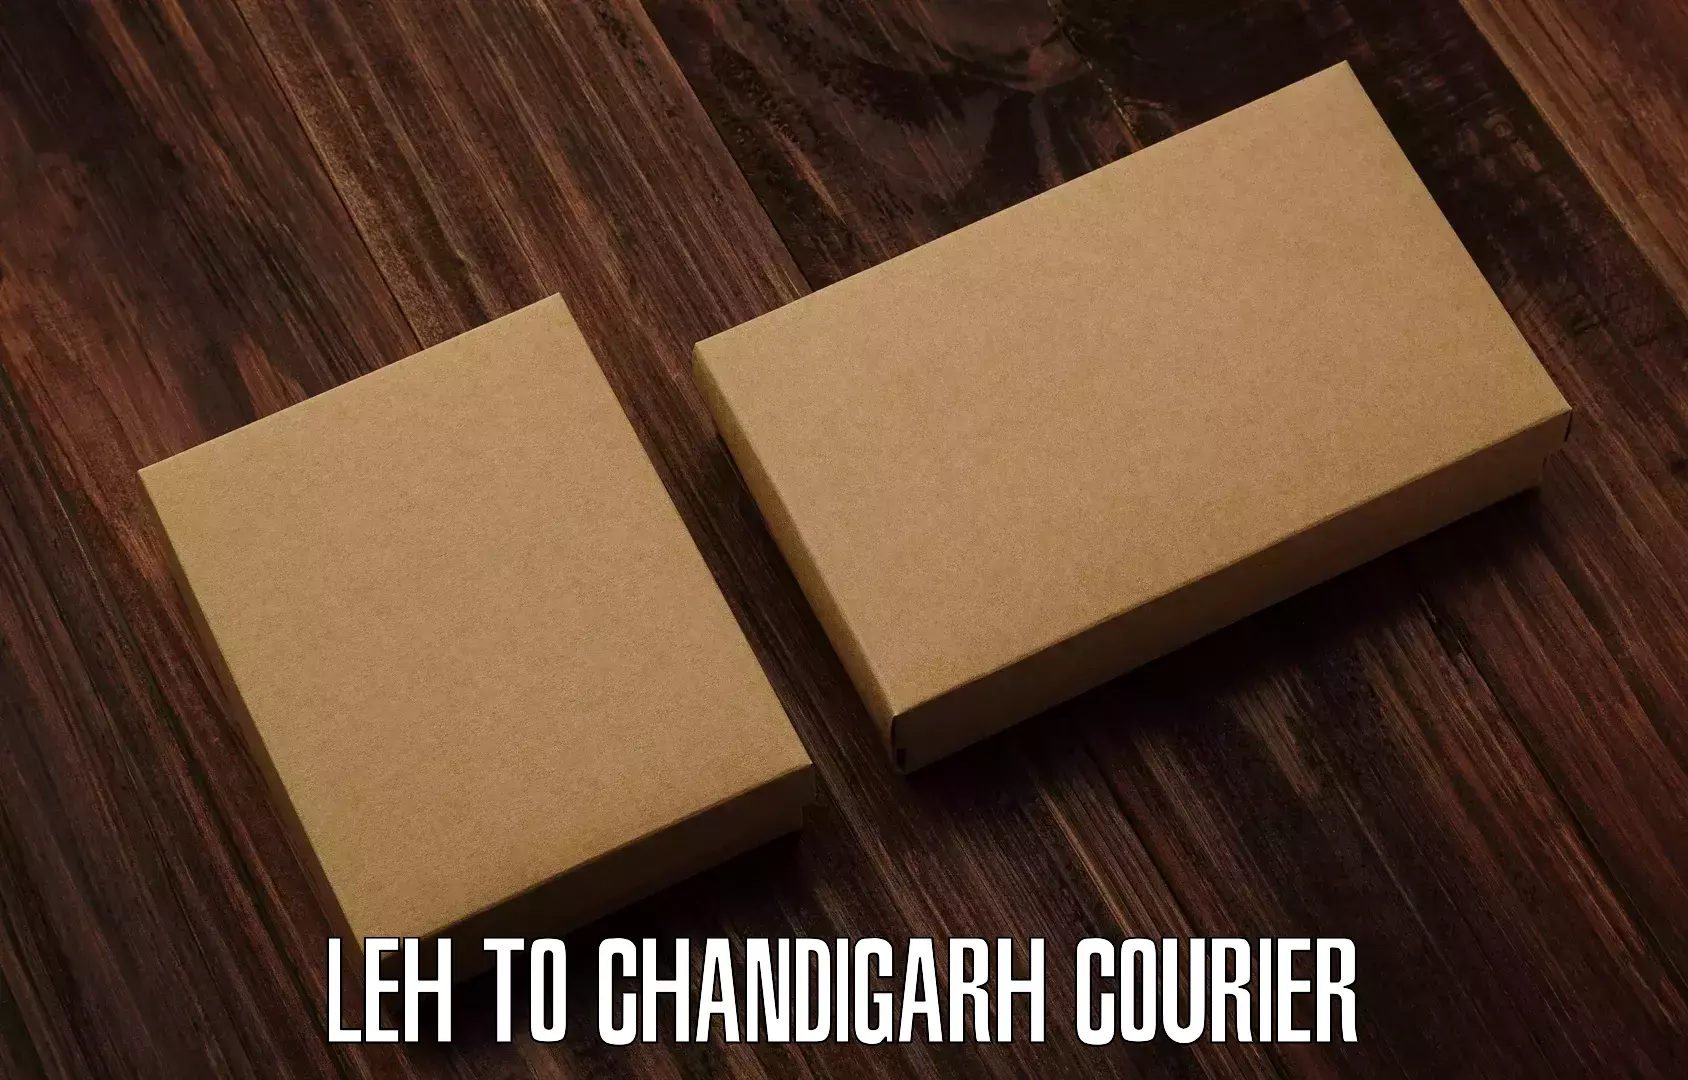 Urban courier service Leh to Chandigarh